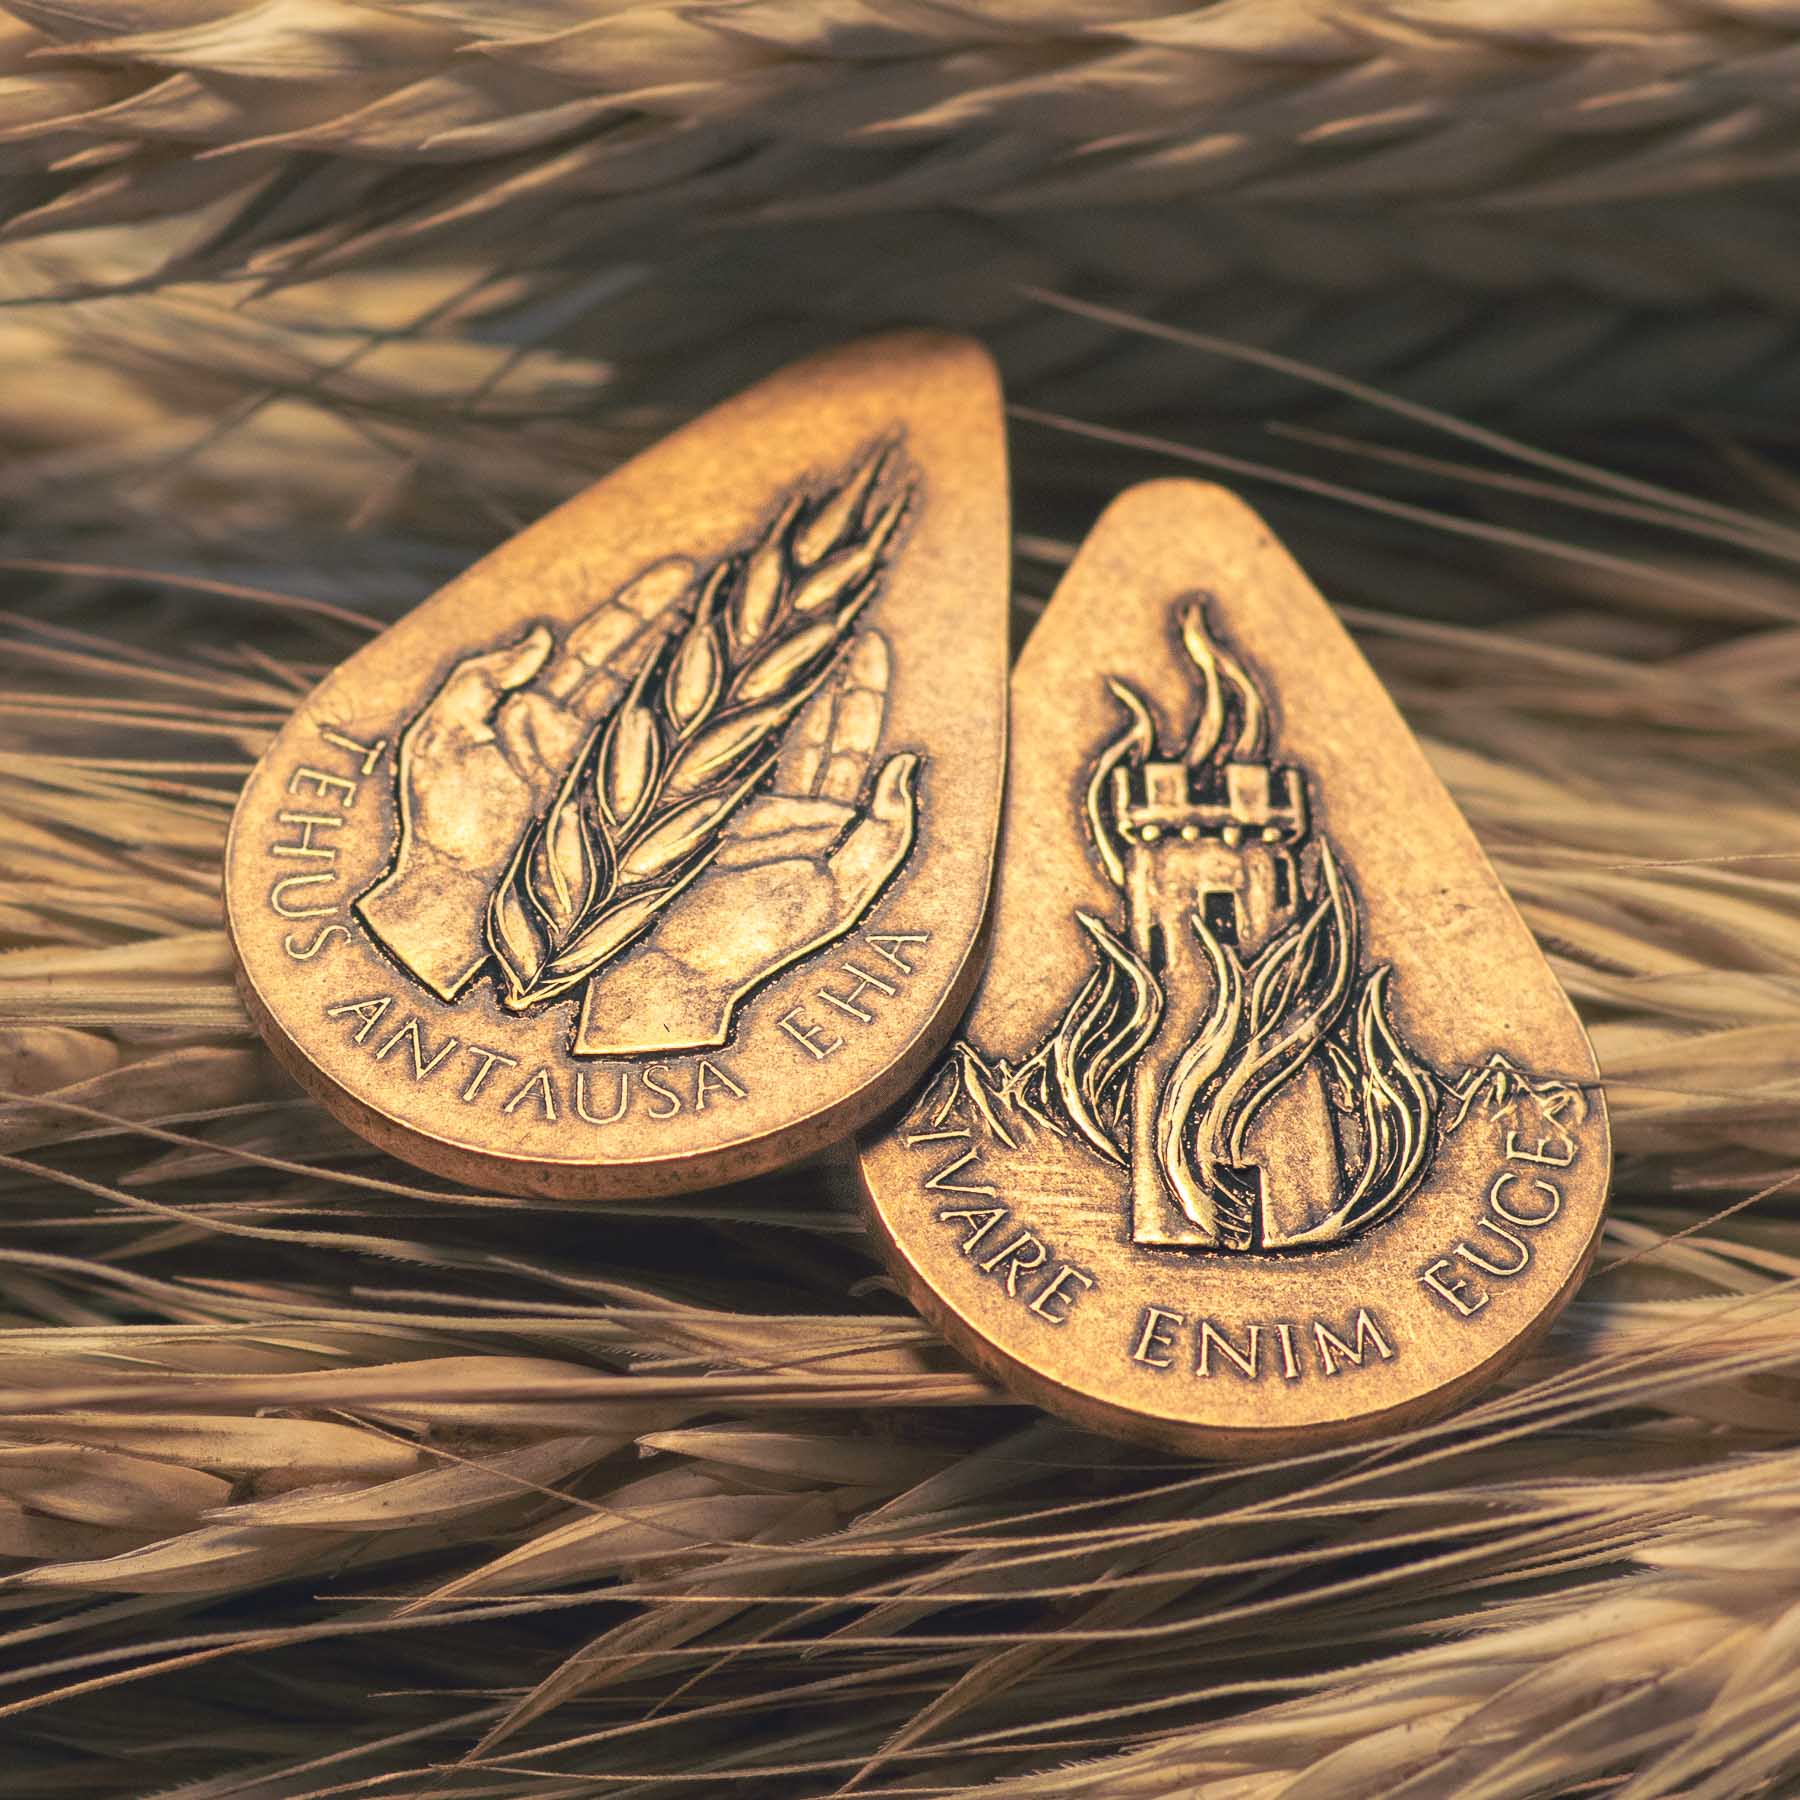 Tehlin Penance Piece Kingkiller Chronicles Coin in Bronze, photographed on wheat grains